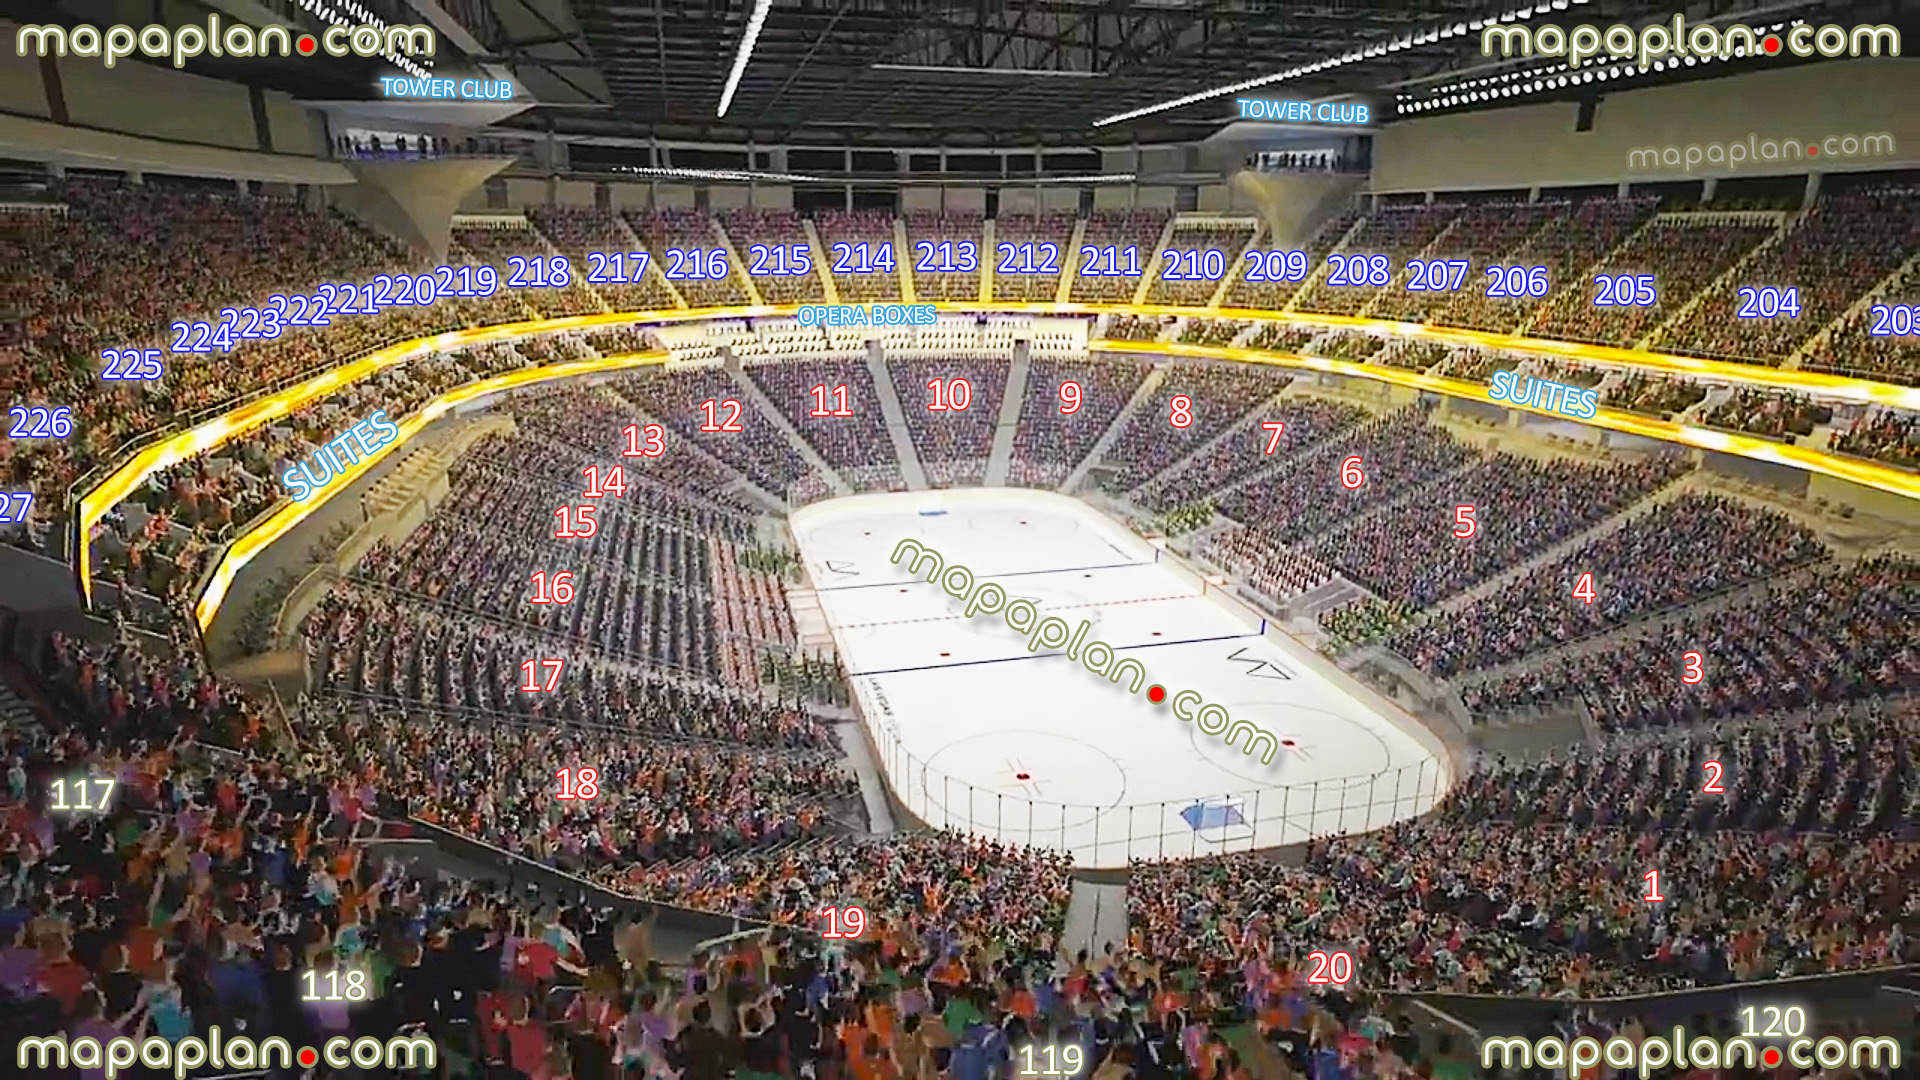 view section 119 row k seat 12 lv nhl hockey team interactive 3d virtual tour photo review players boxes penalty sideline baseline corner goal opera boxes lower upper level sections Las Vegas New T-Mobile Arena MGM-AEG seating chart